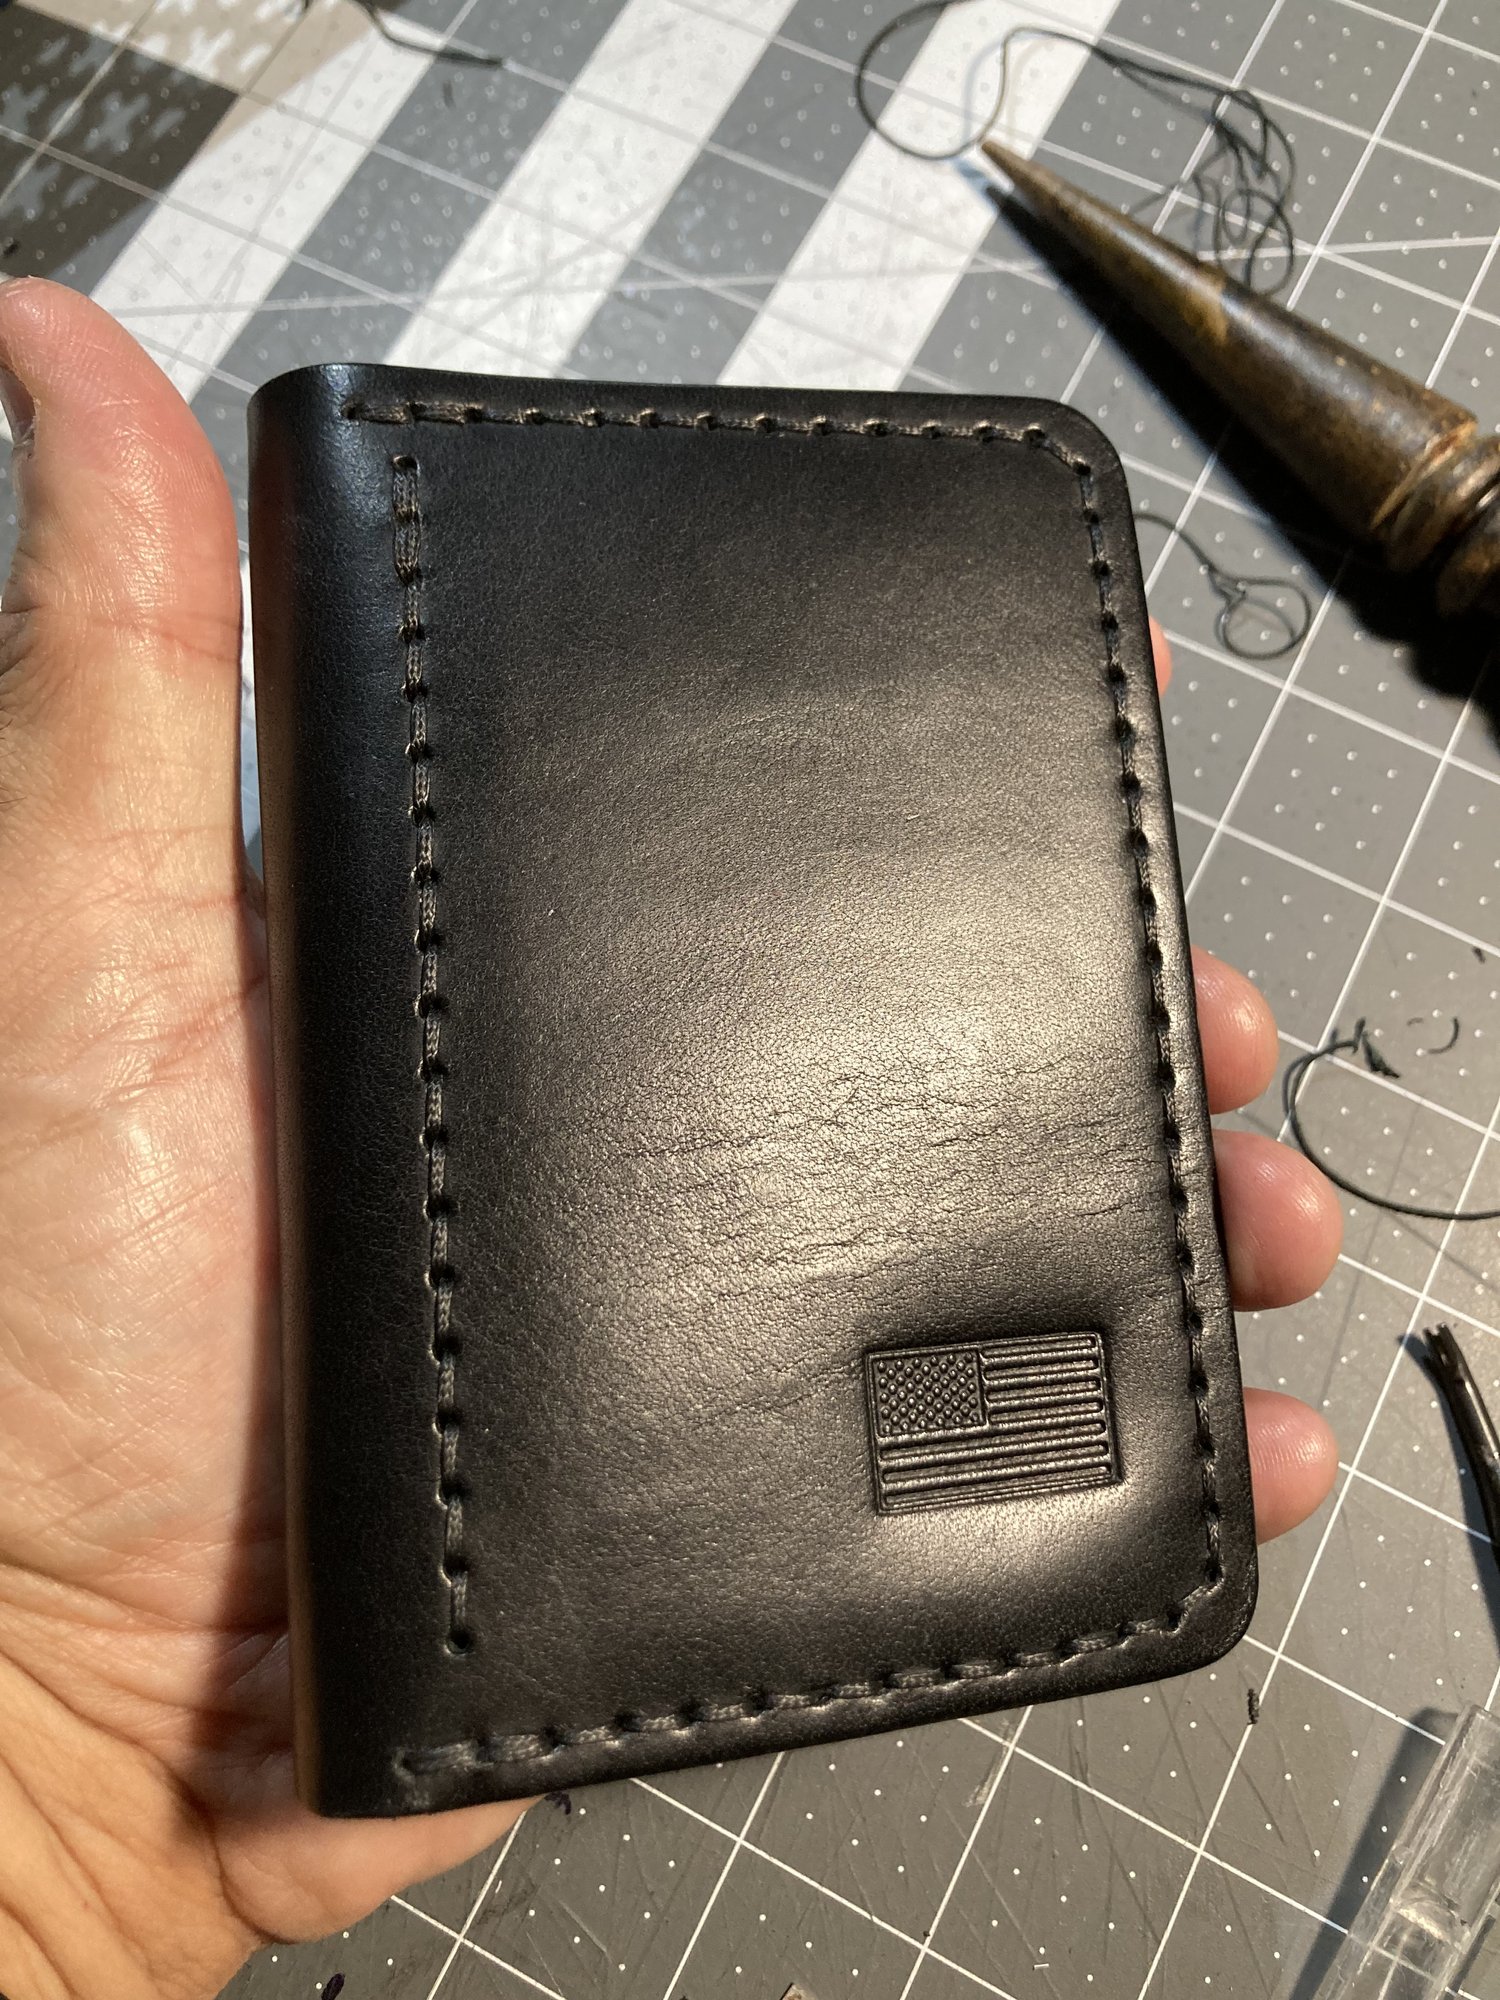 Handmade badge and credentials wallet. - Quality, Handmade Leather Goods